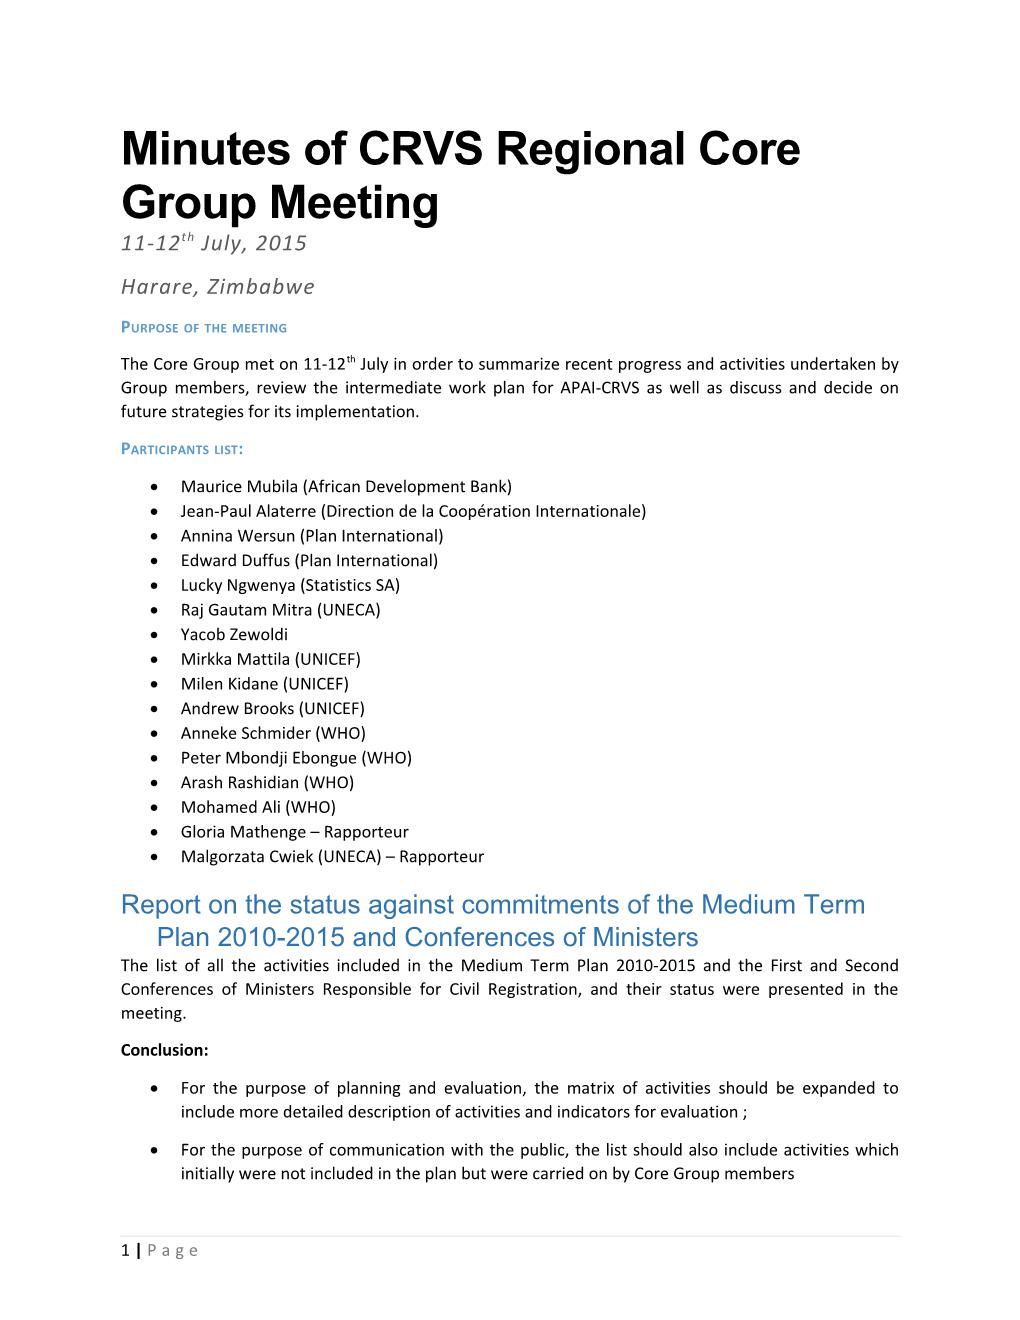 Minutes of CRVS Regional Core Group Meeting